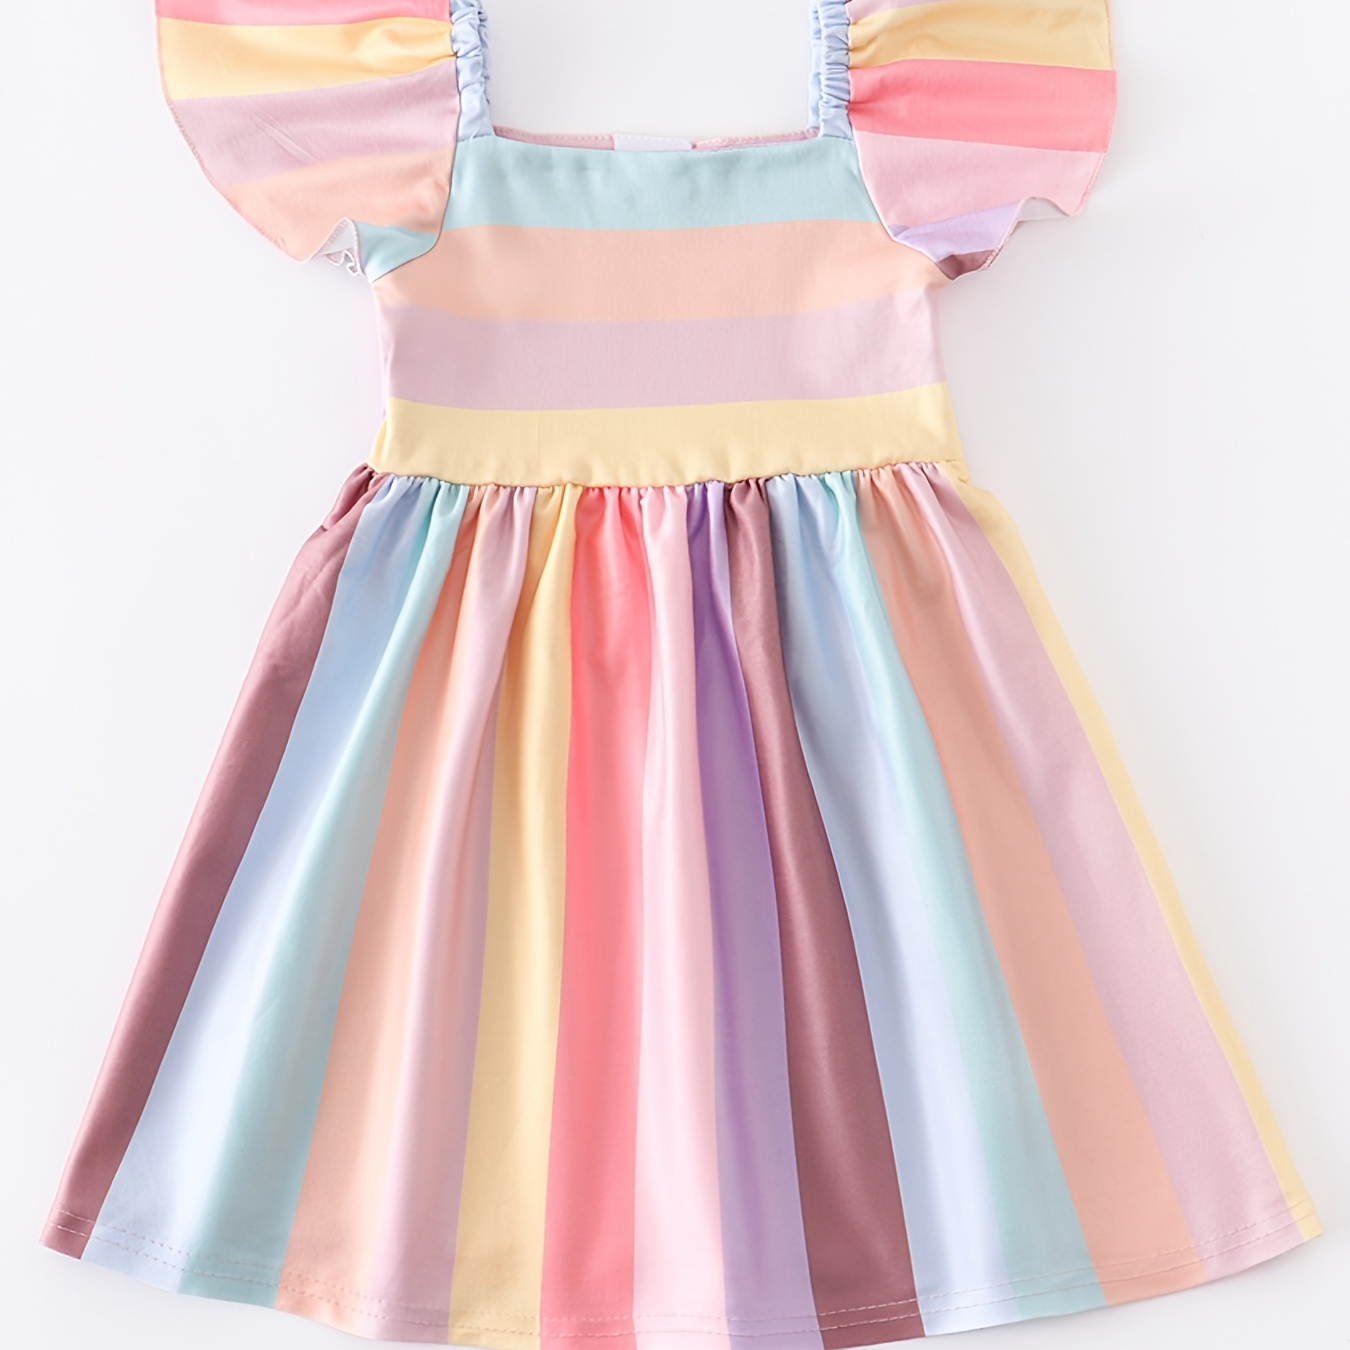 Girls Casual Rainbow Fly Sleeve Dress Clothes | Shop The Latest Trends ...